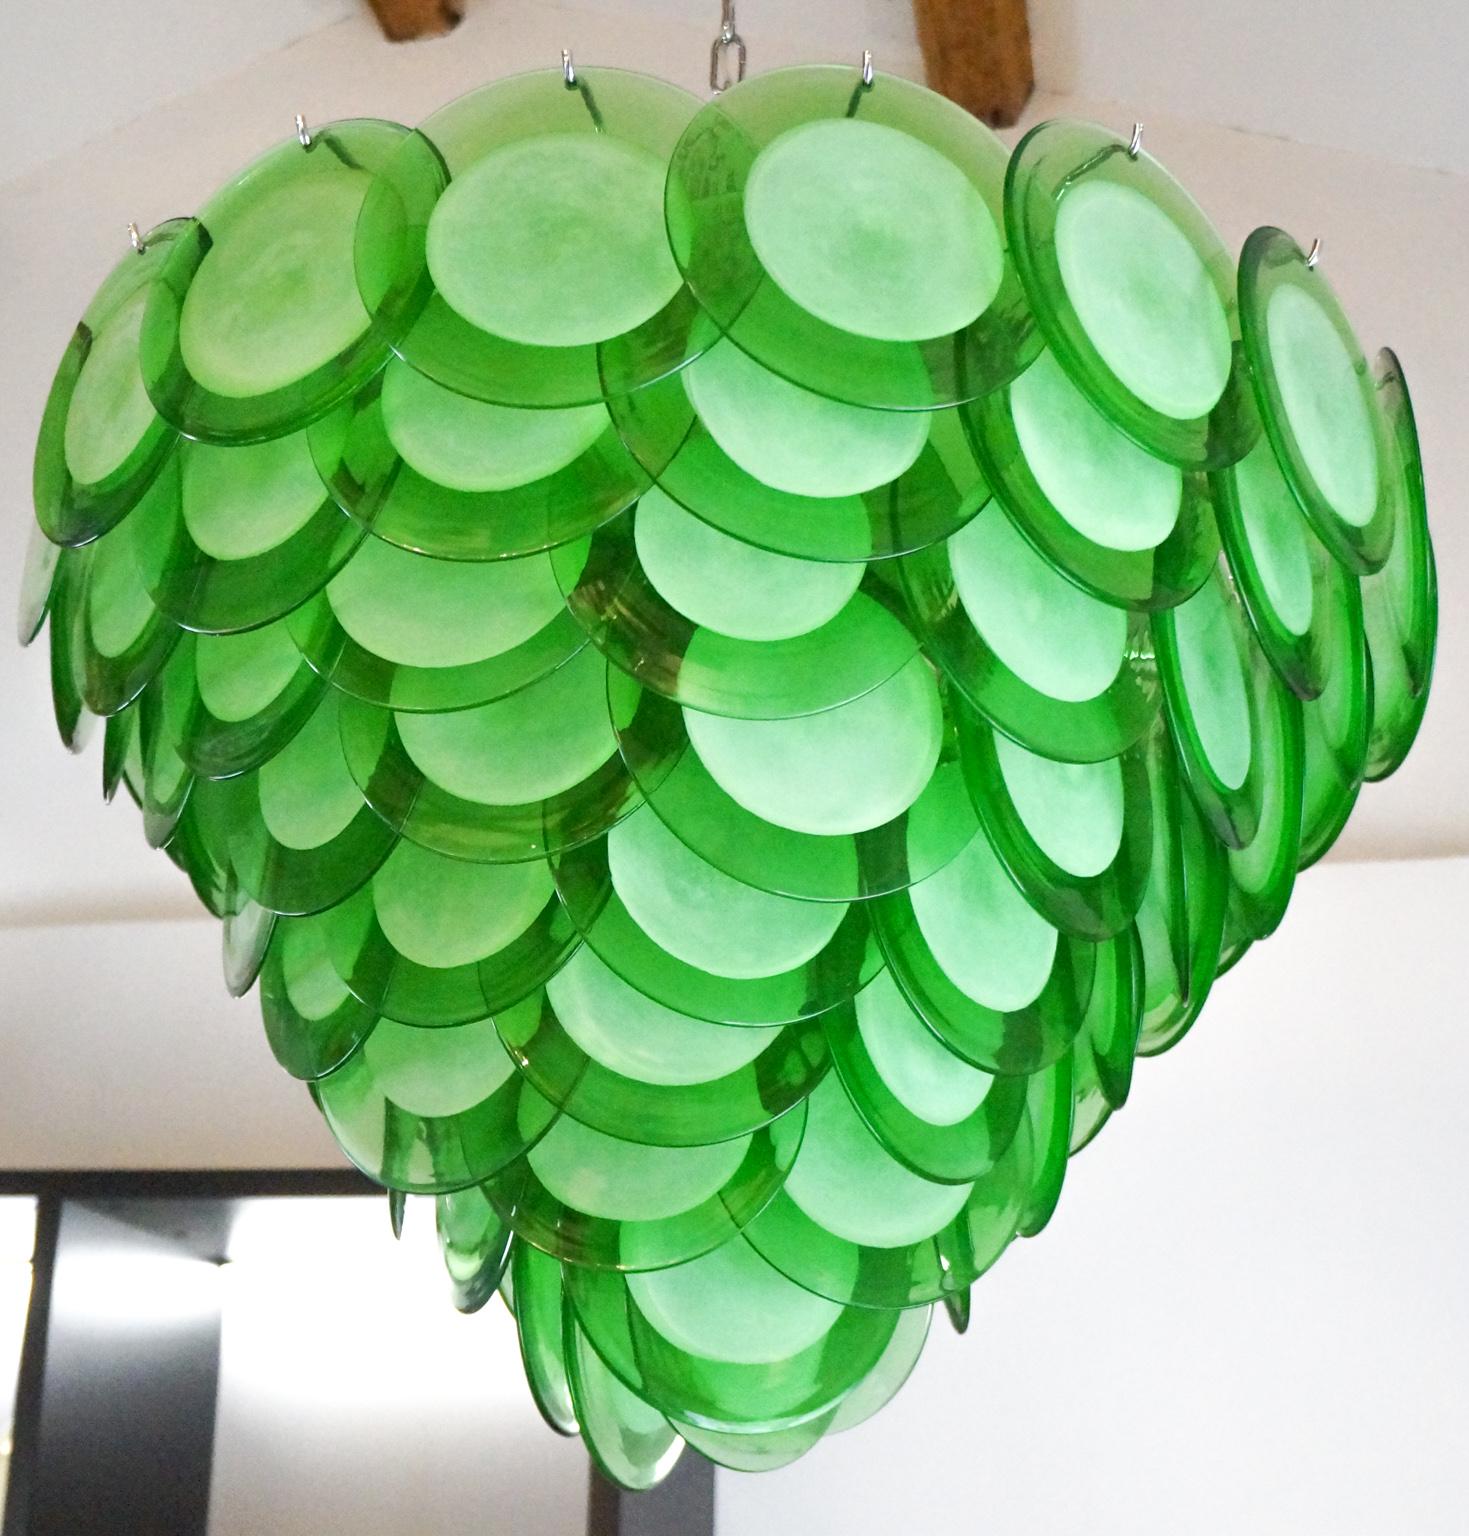 Check out this colorful chandelier, made up of 90 green glass elements that make you crazy. It would be able to give joy even to a minimal white room.
Overall, it is a very simple but impressive chandelier.
It is in fact characterized by the